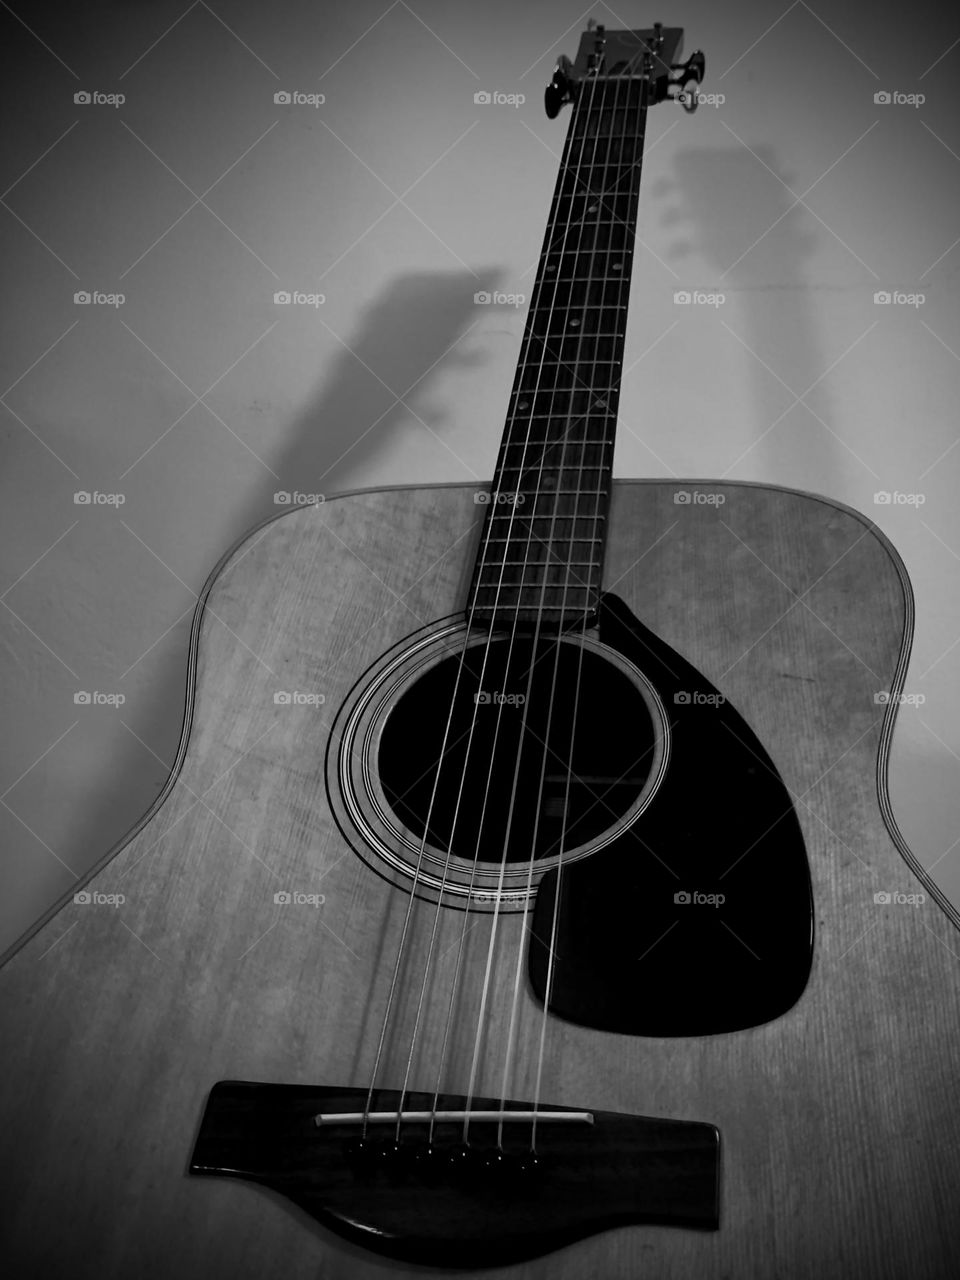 Acoustic guitar leaning on the wall with two shadows. Black and white. 